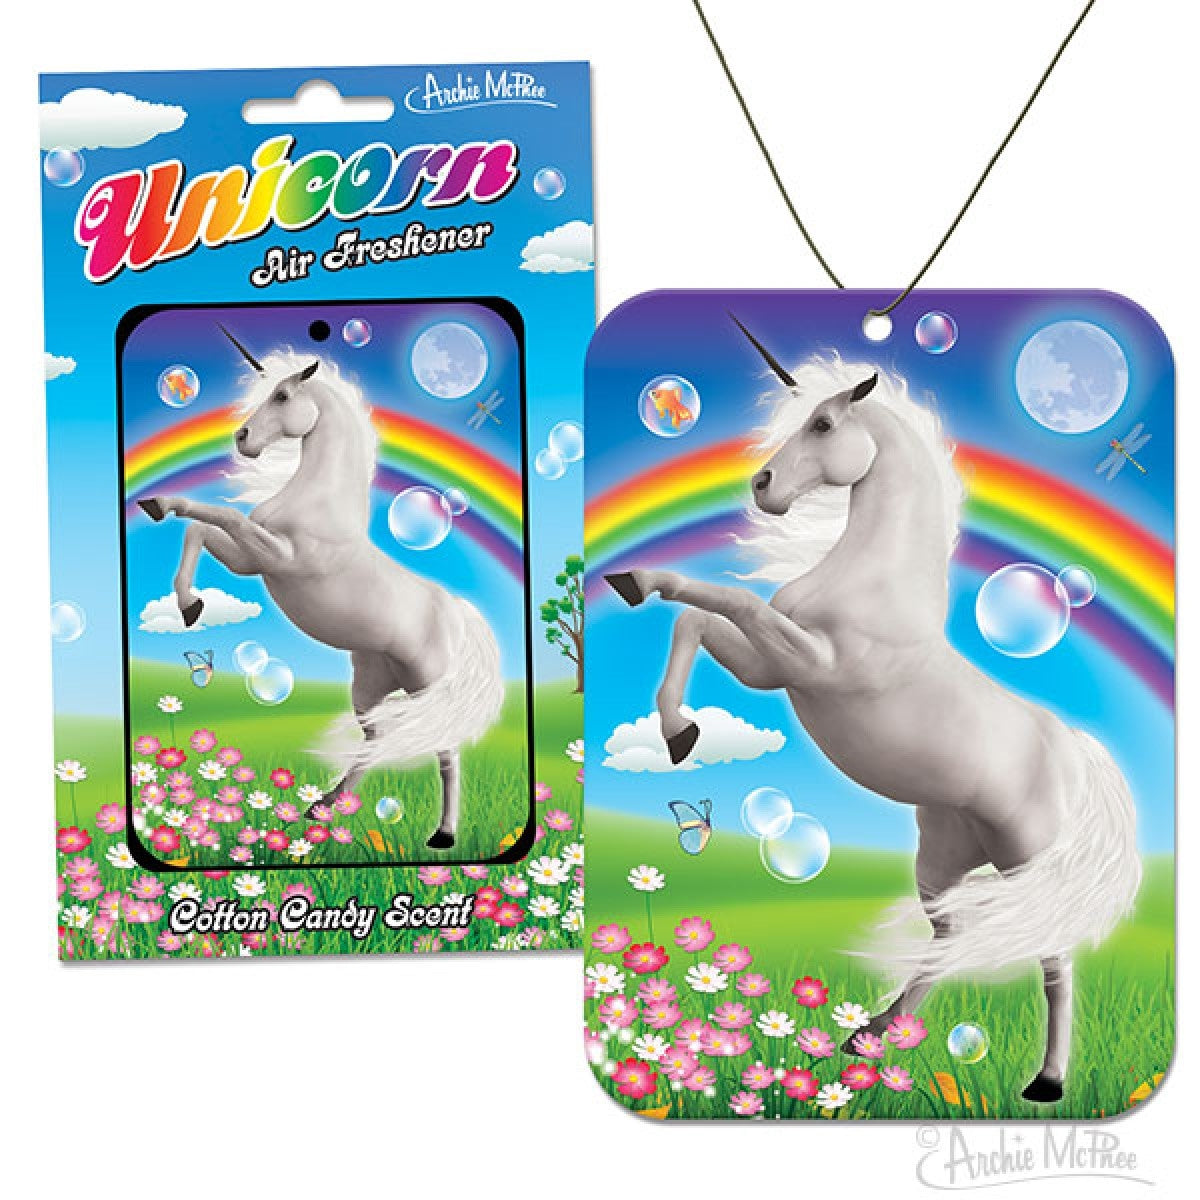 4.25" rectangular white unicorn with rainbow against blue sky image cotton-candy scented air freshener, shown next to one in illustrated backer card packaging